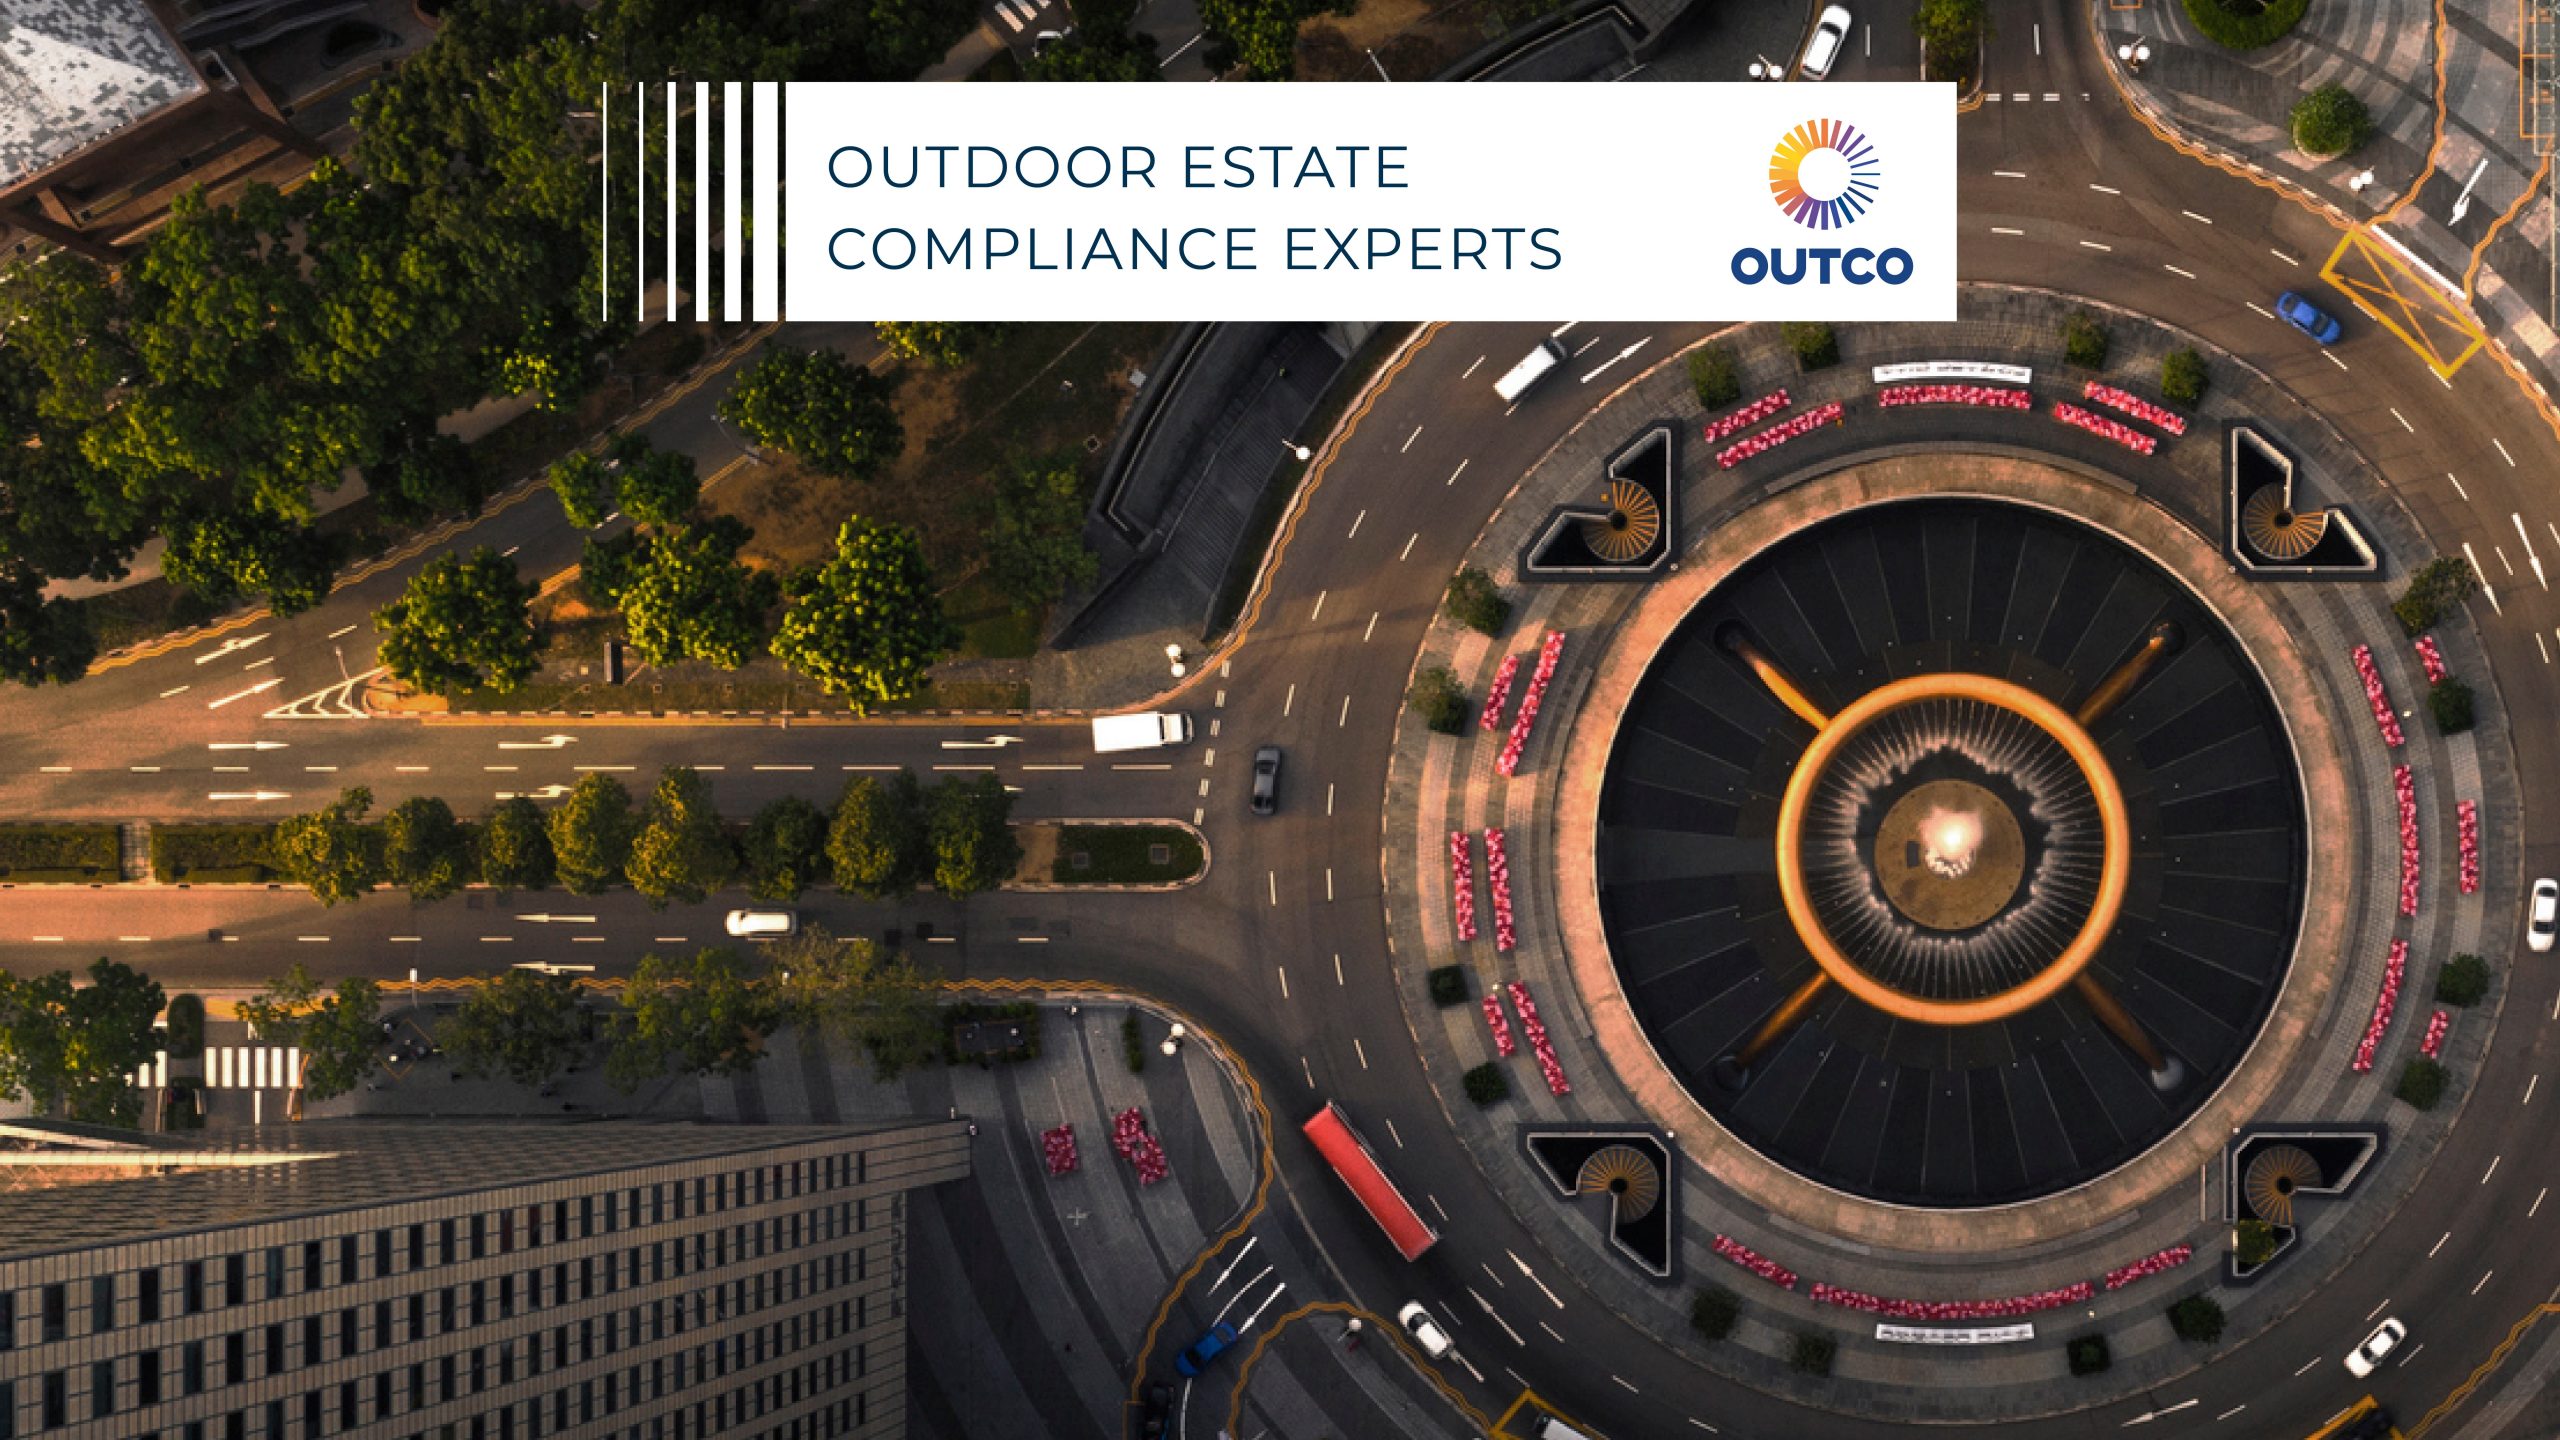 Total Capital-backed GRITIT Group rebrands as OUTCO, the UK’s leading outdoor estates compliance experts